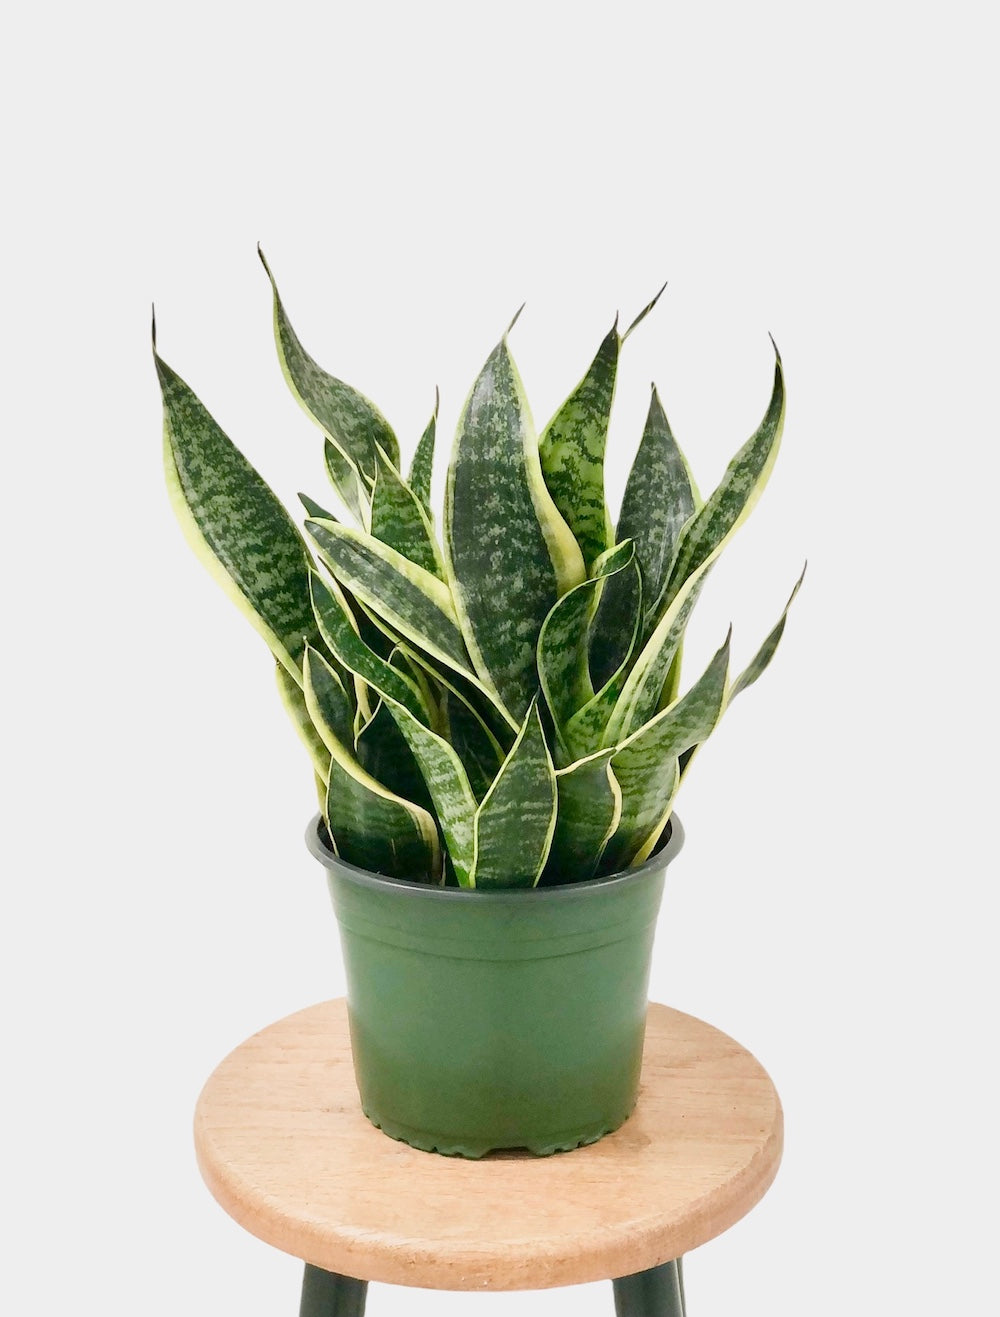 Sansevieria Futura aka Snake Plant or Mother in Law Tongue Plant